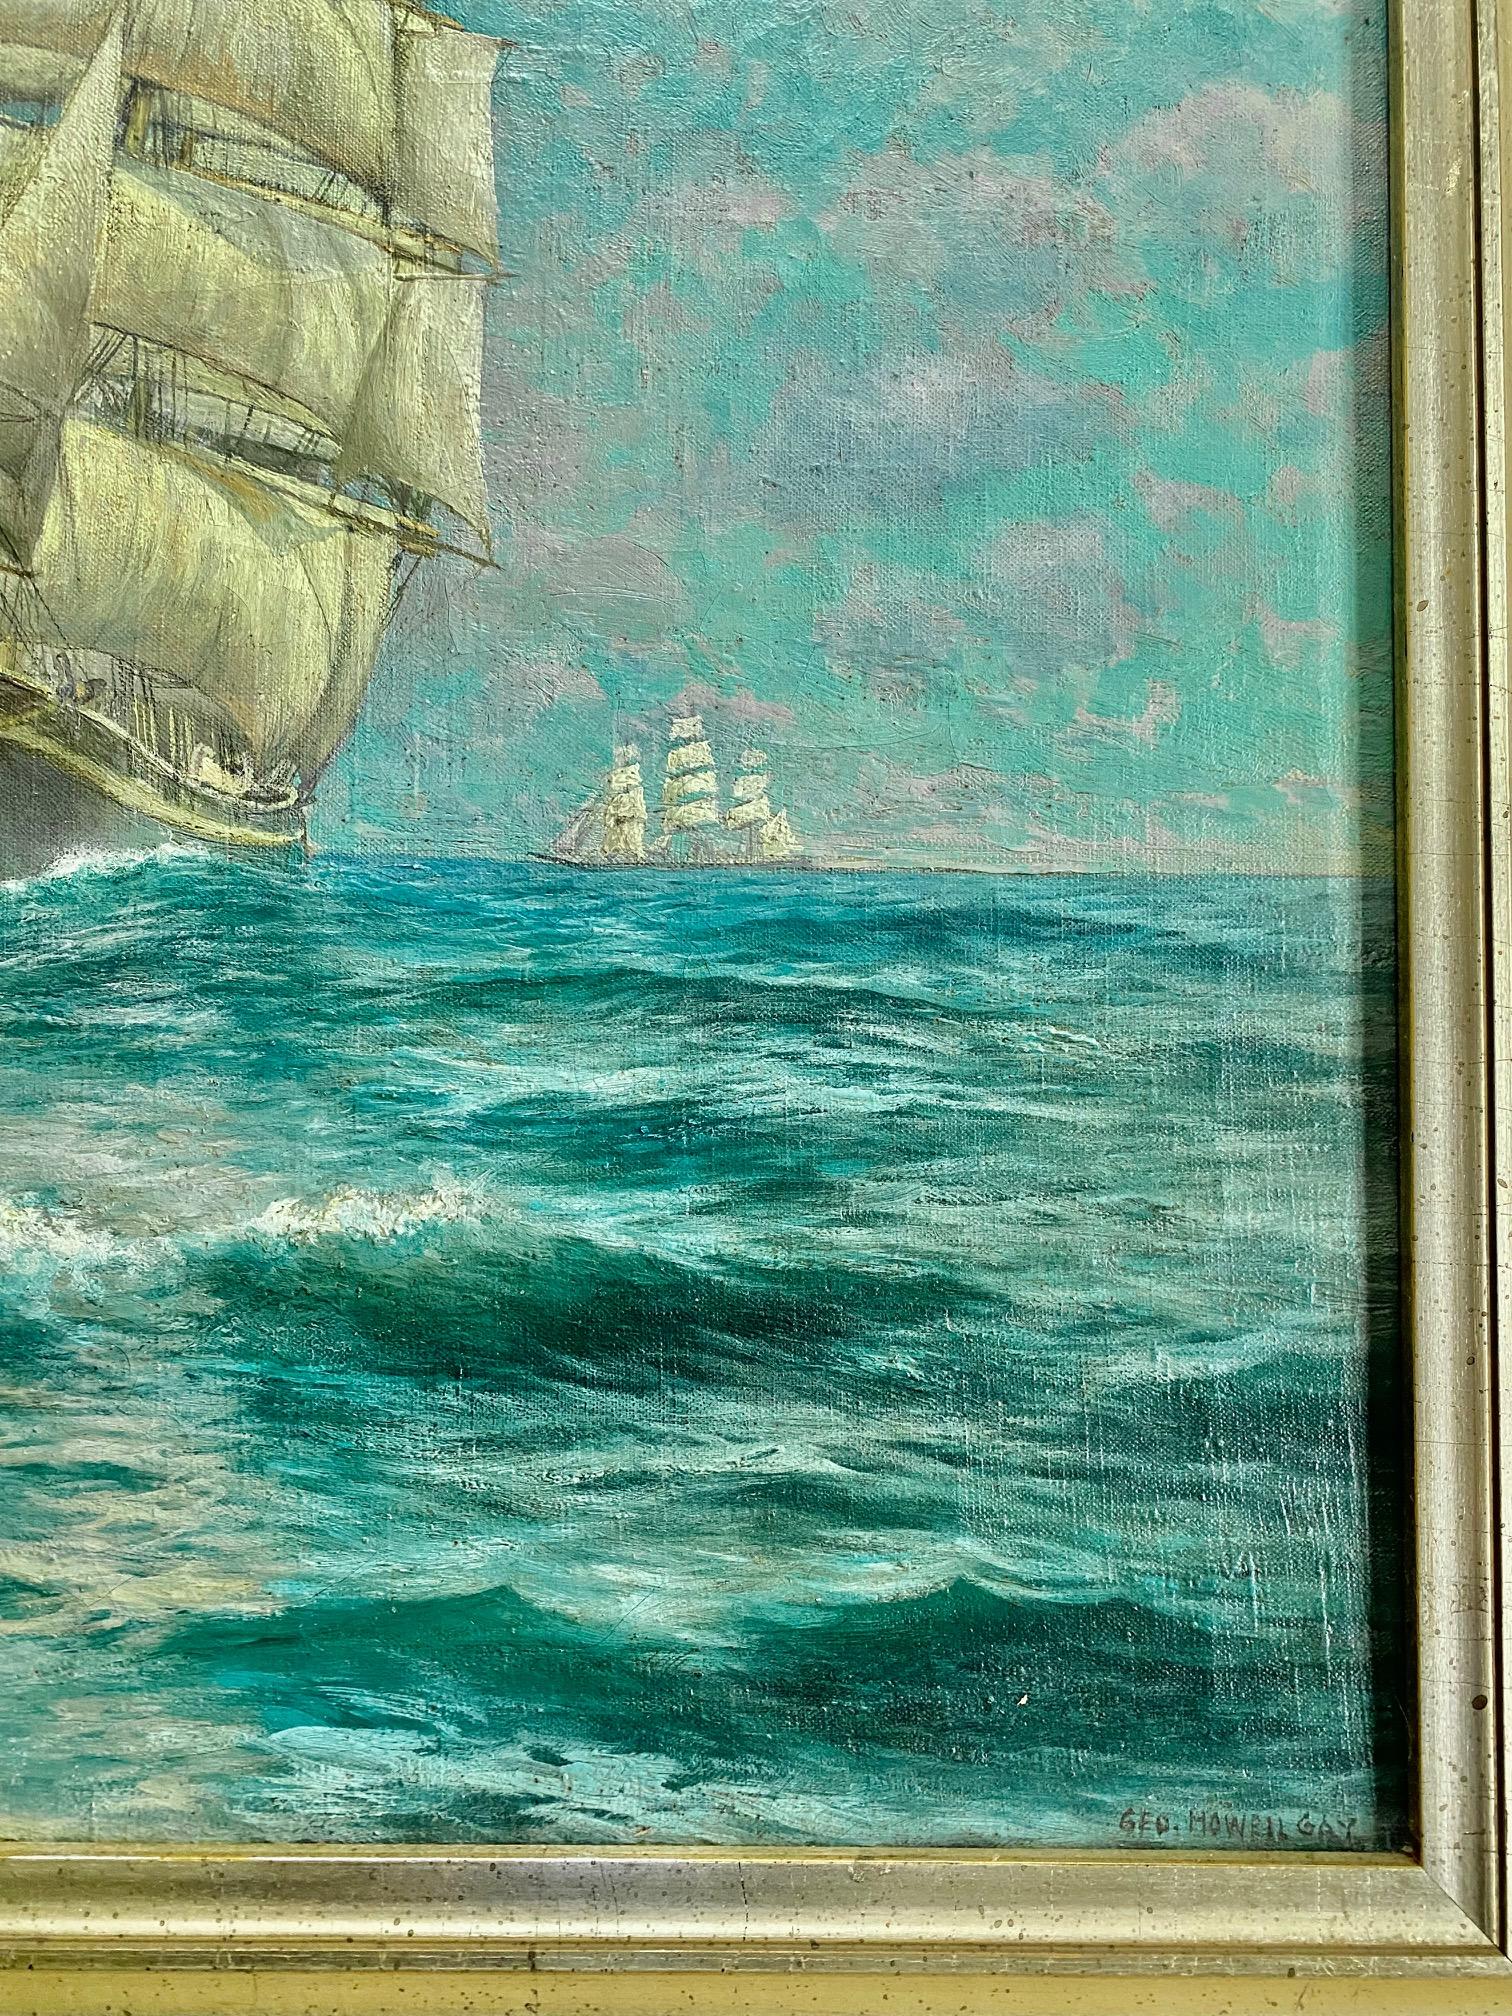 Late 19th Century Seascape with Clippership by George Howell Gay (American: 1858 - 1931), ca 1890 For Sale